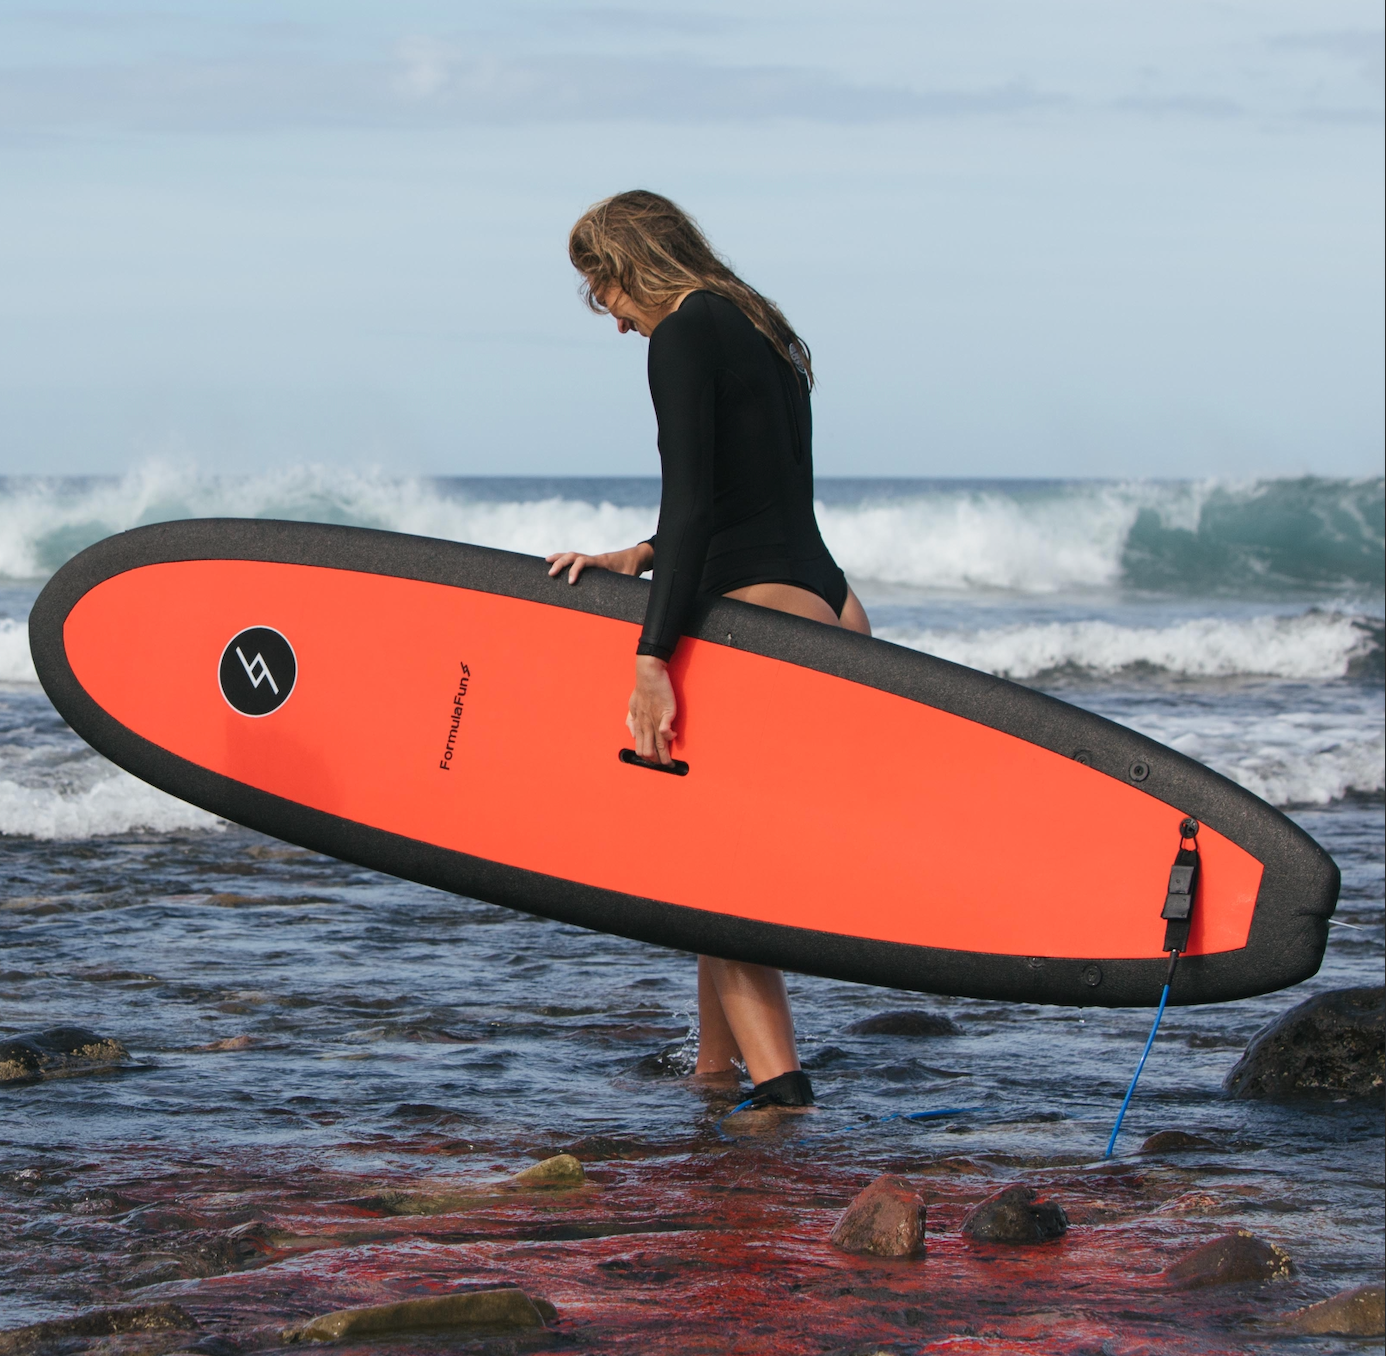 A woman entering the ocean in a wetsuit with a red 7 foot 10 inch Formula Fun Foamies DOHO surfboard